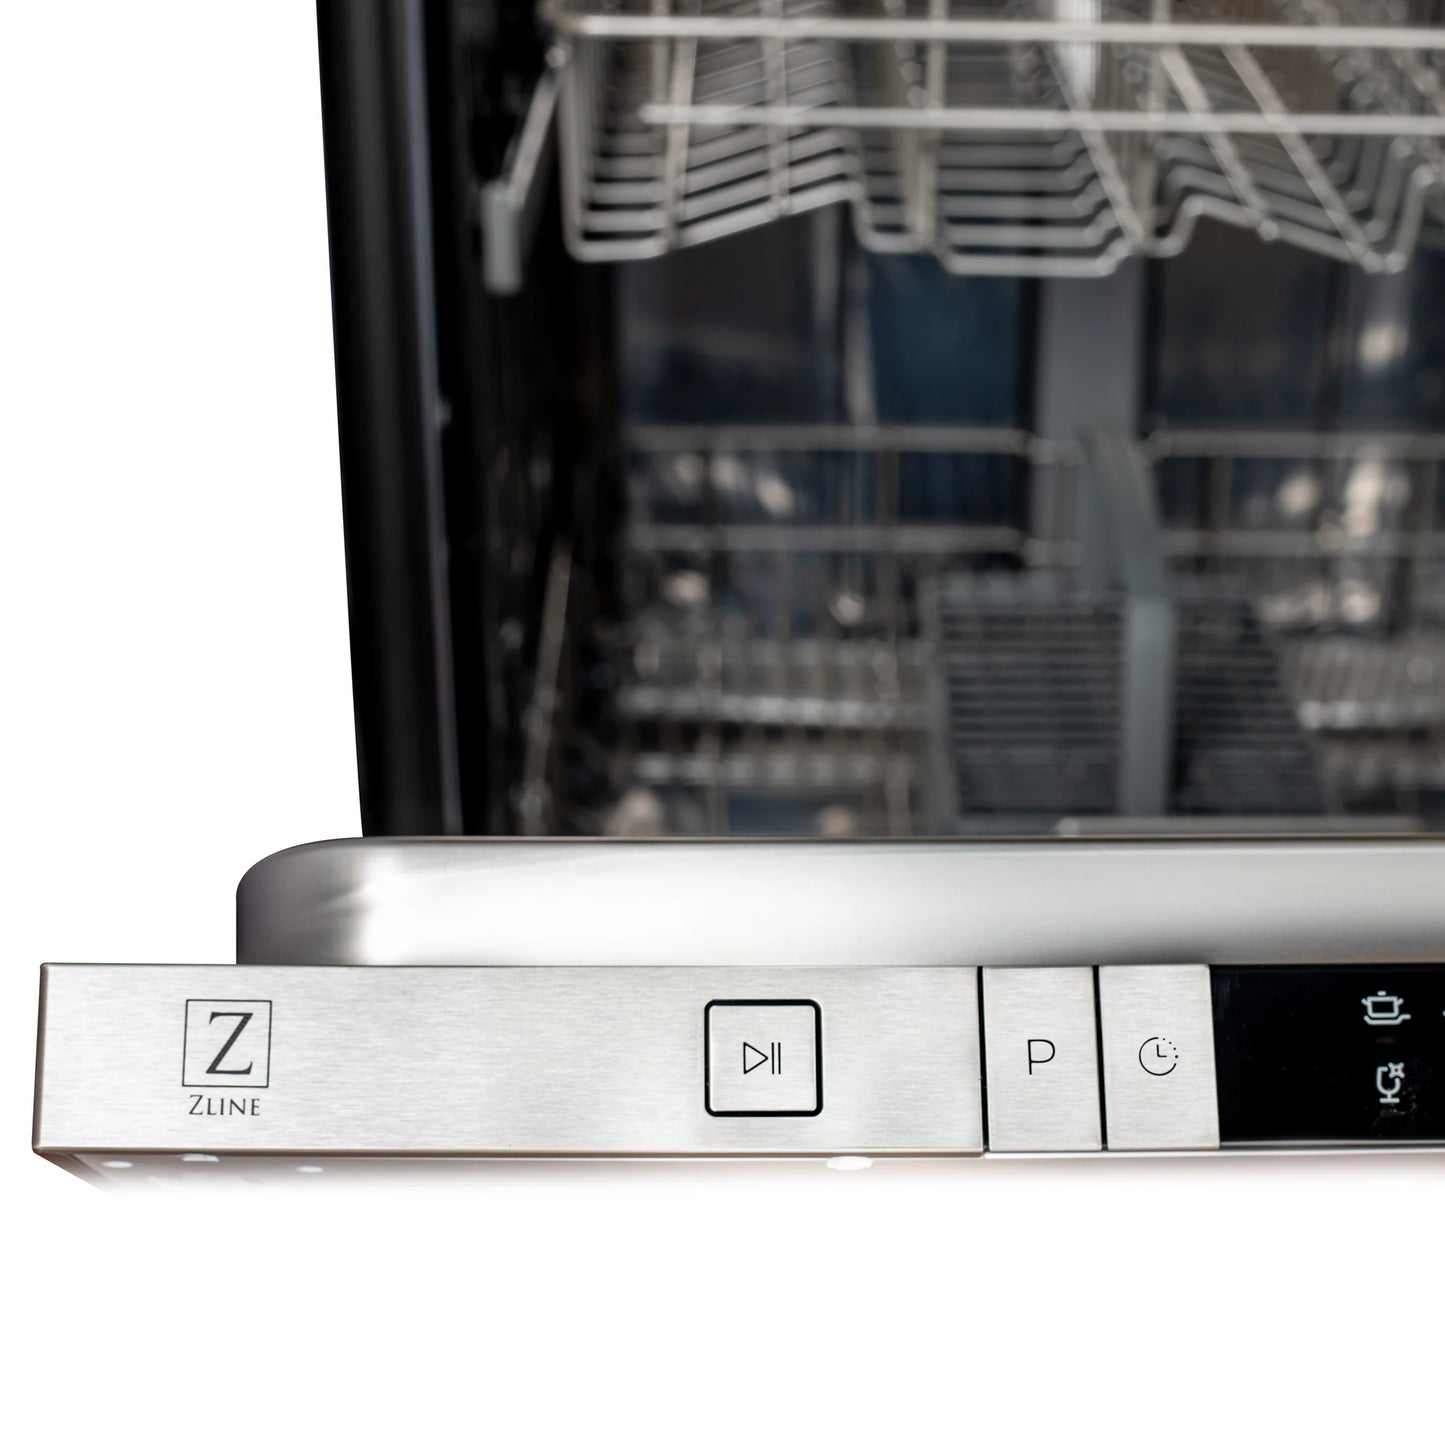 ZLINE 24 in. Compact Top Control Dishwasher with Black Matte Panel and Traditional Handle (DW-BLM-24)